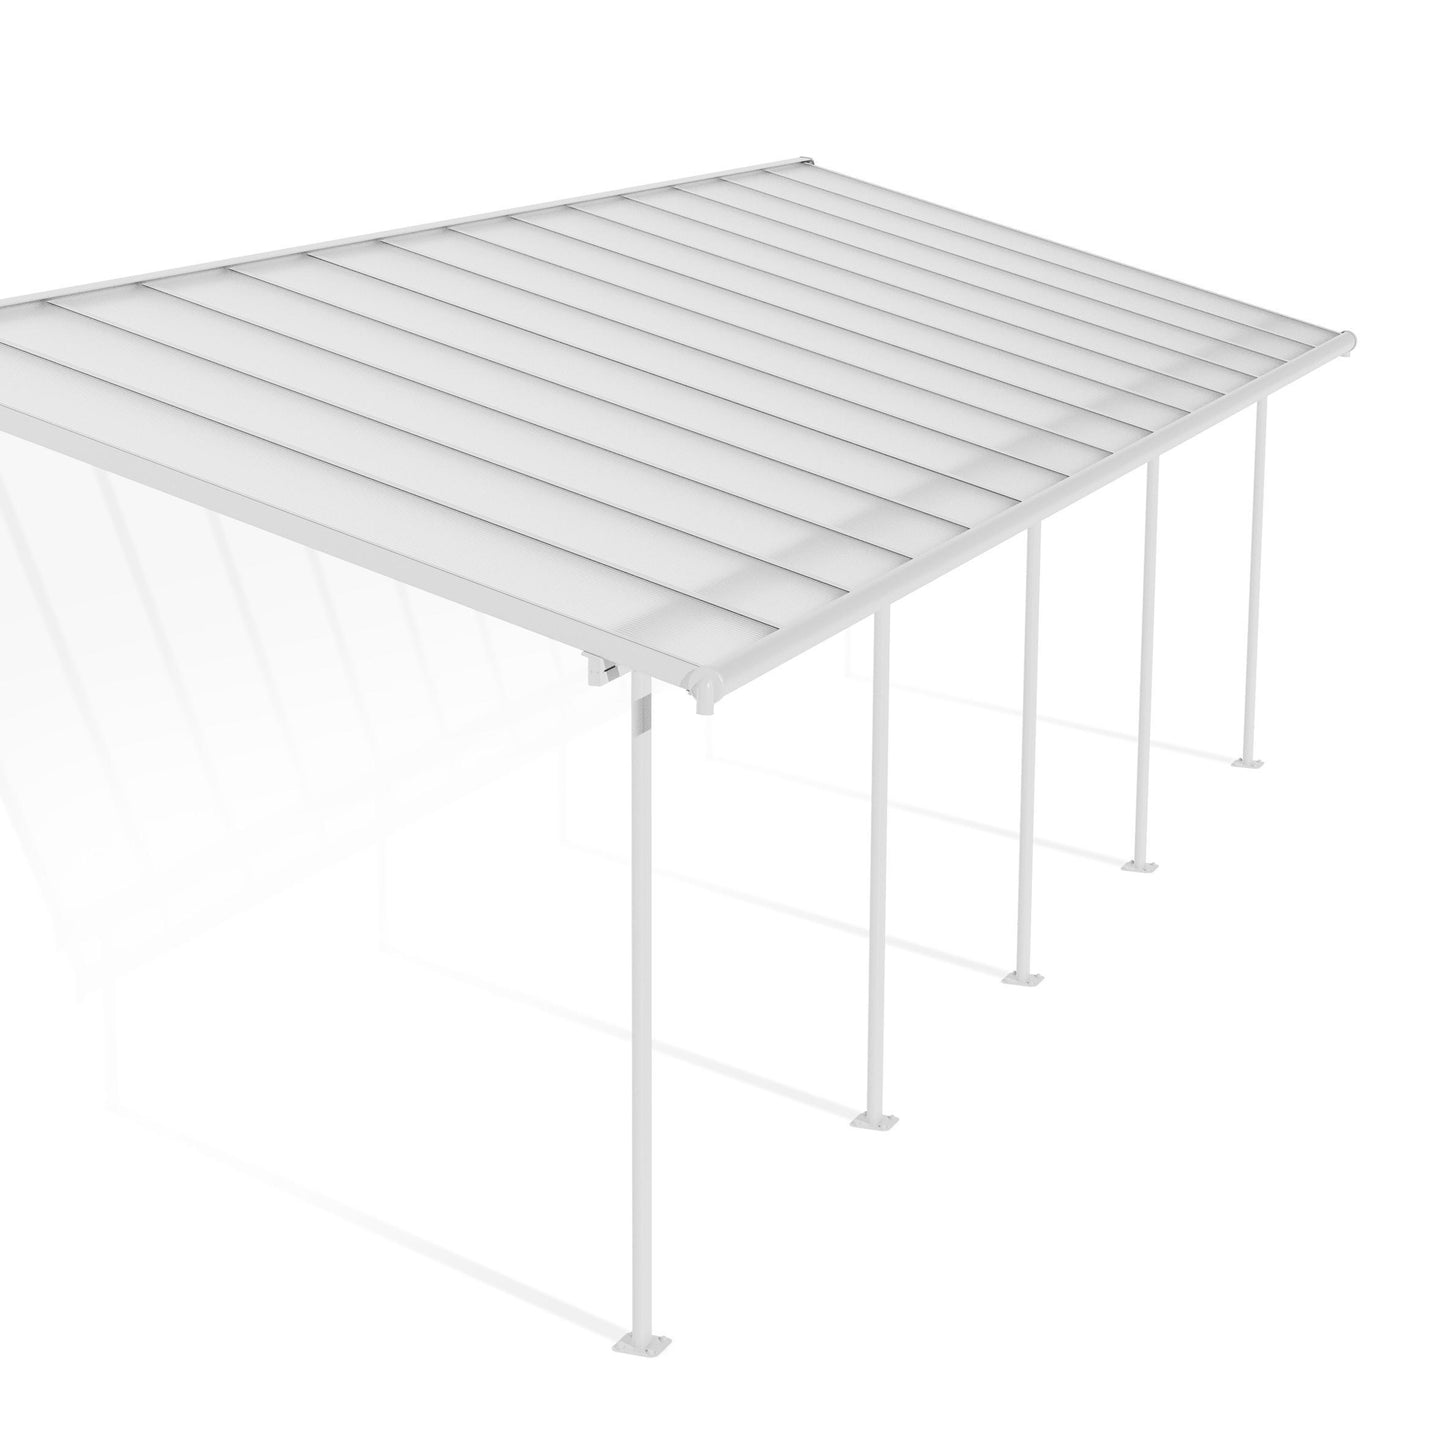 Canopia by Palram 3 x 8.51 Sierra Patio Cover - White